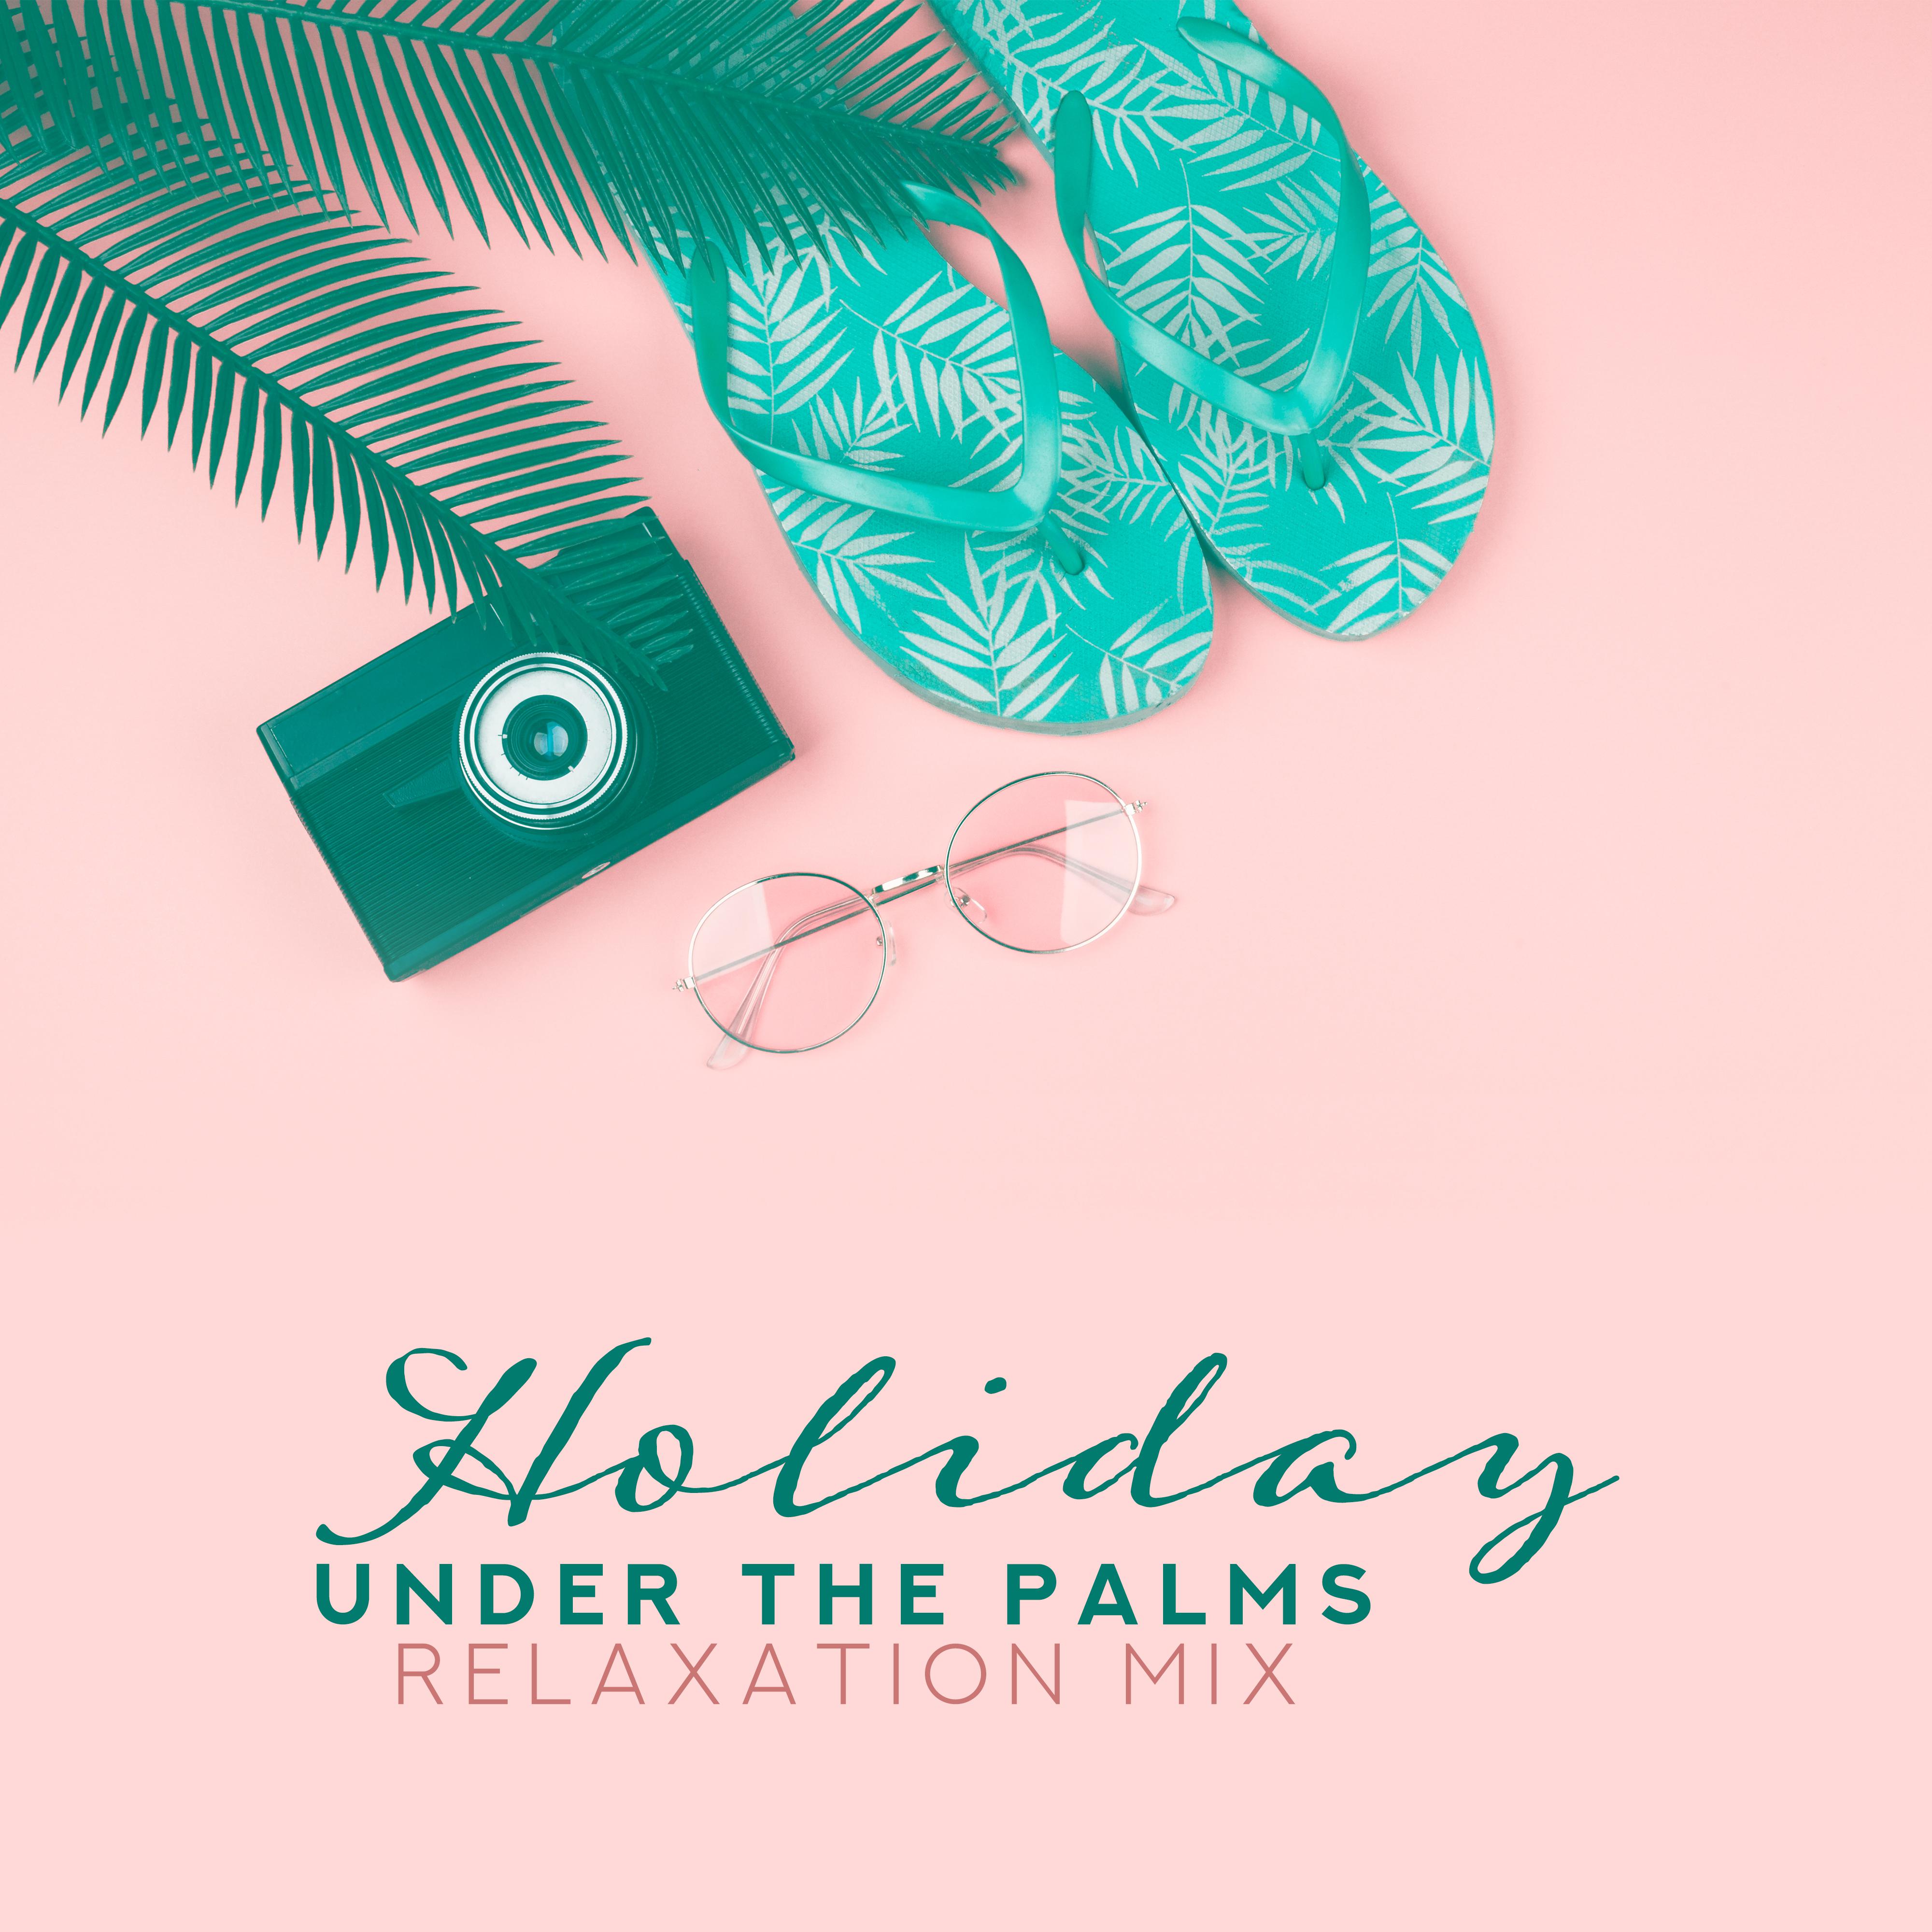 Holiday Under the Palms Relaxation Mix – Top 2019 Chillout Music for Lazy Time Spending on the Beach, Tropical Island Songs, Rest Soft Sounds, Easy Listening Vibes